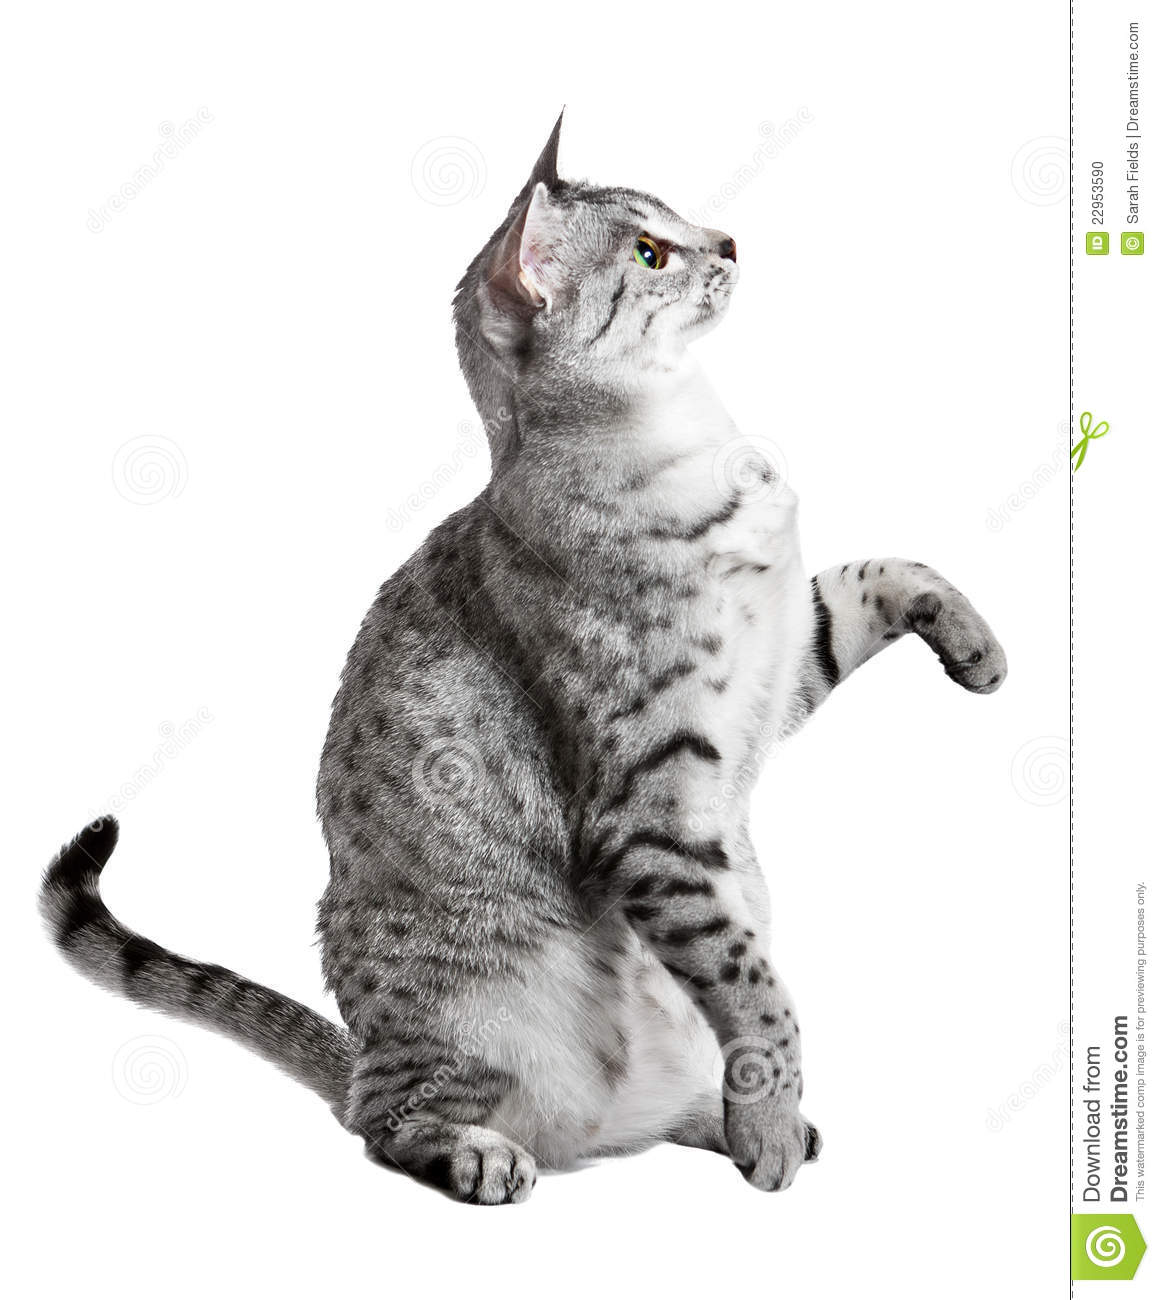 Cute Egyptian Mau Breed Cat Looking To The Side With One Paw Raised